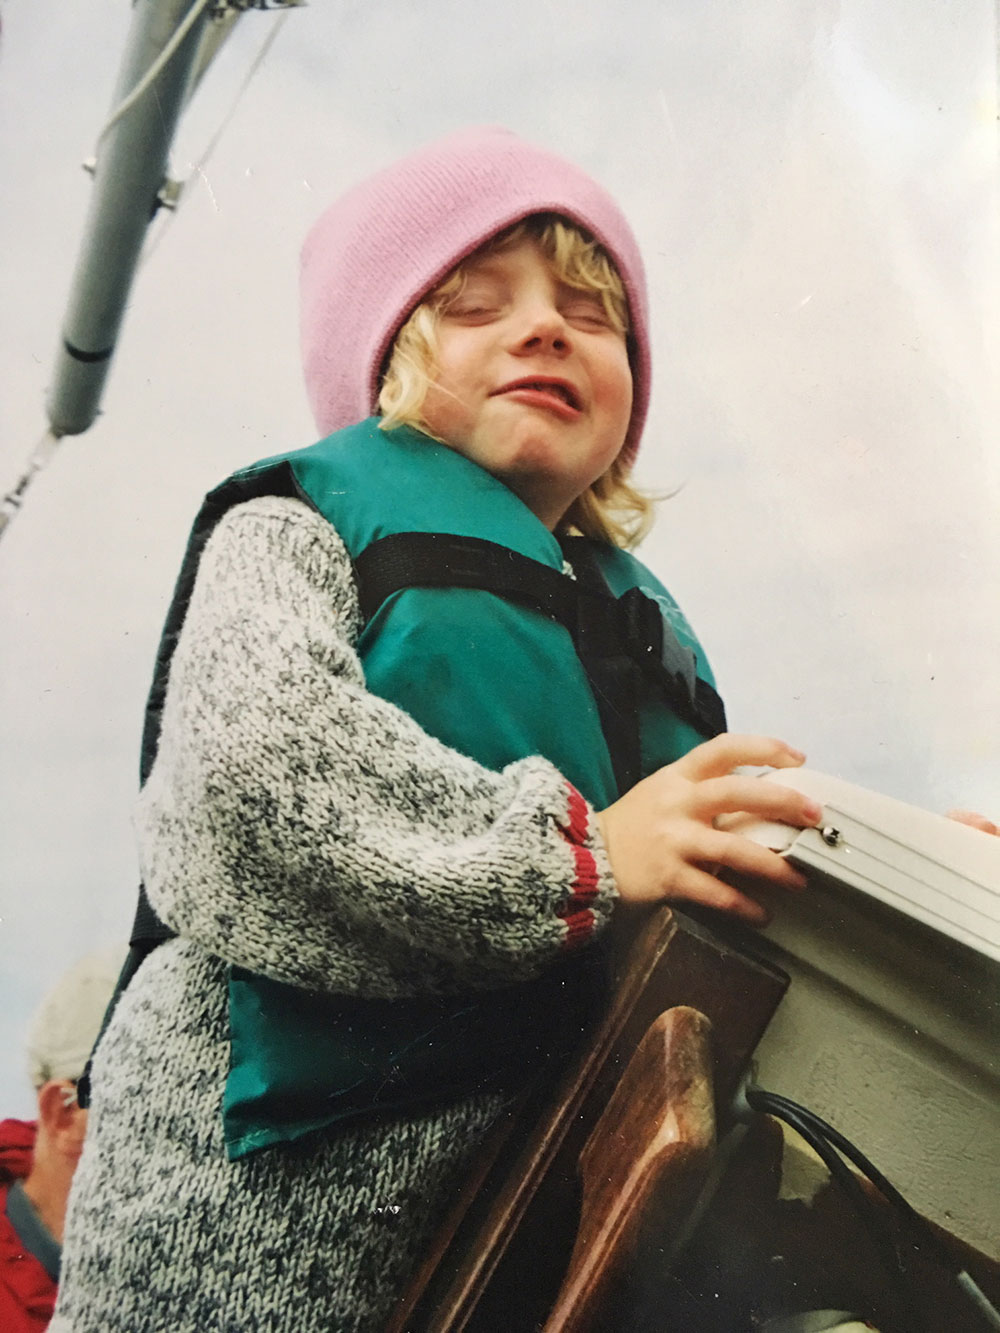 As a young child, Julia was not sold on sailing.